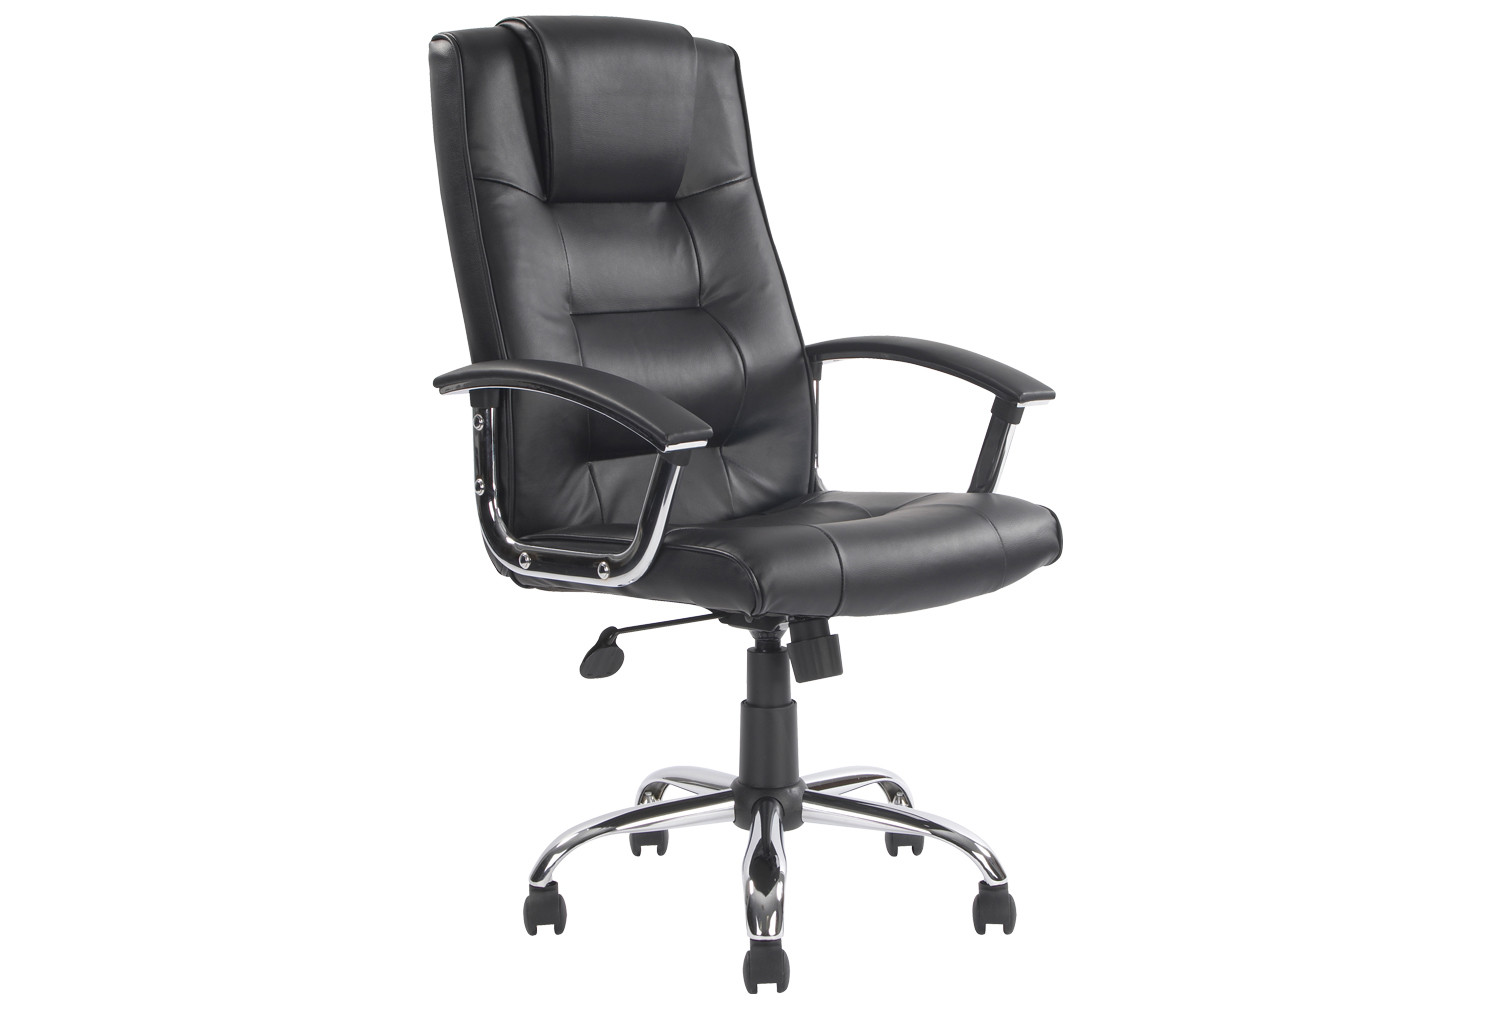 Skye High Back Black Leather Faced Executive Office Chair, Black, Fully Installed